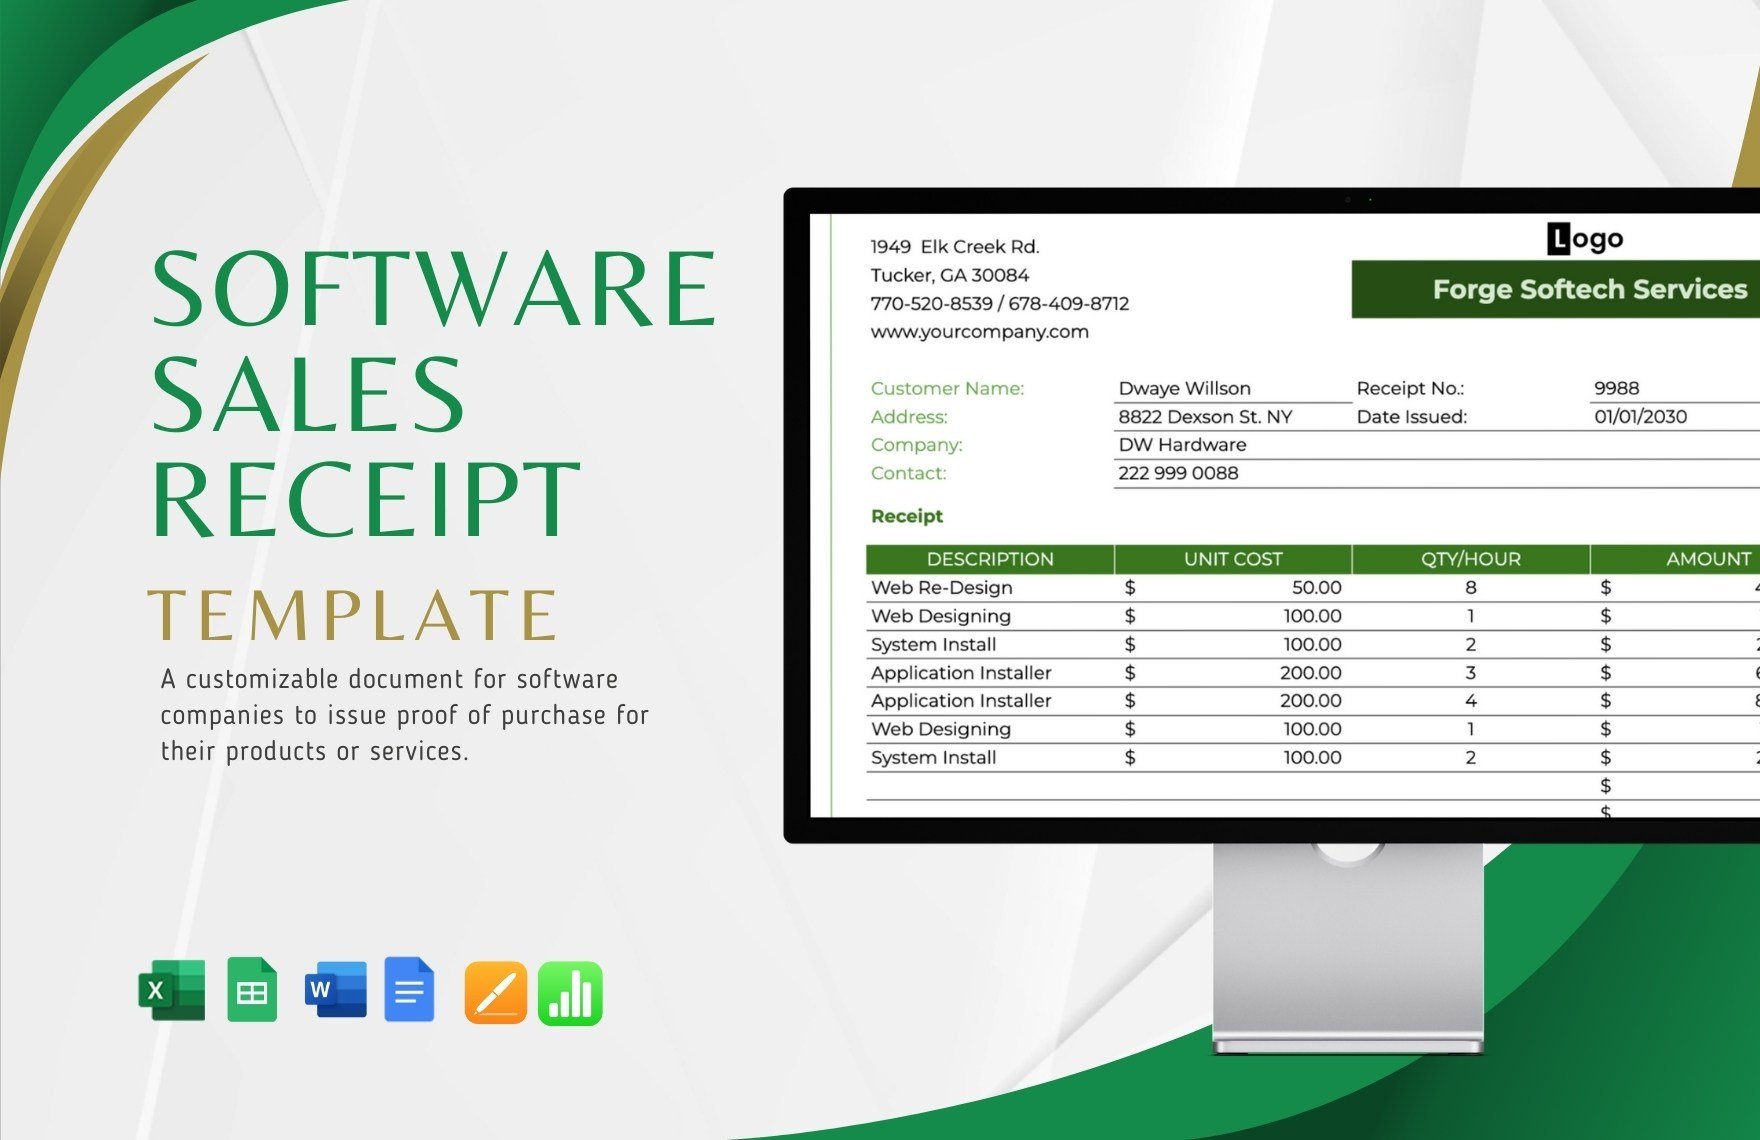 Software Sales Receipt Template in Word, Google Docs, Excel, Google Sheets, Apple Pages, Apple Numbers